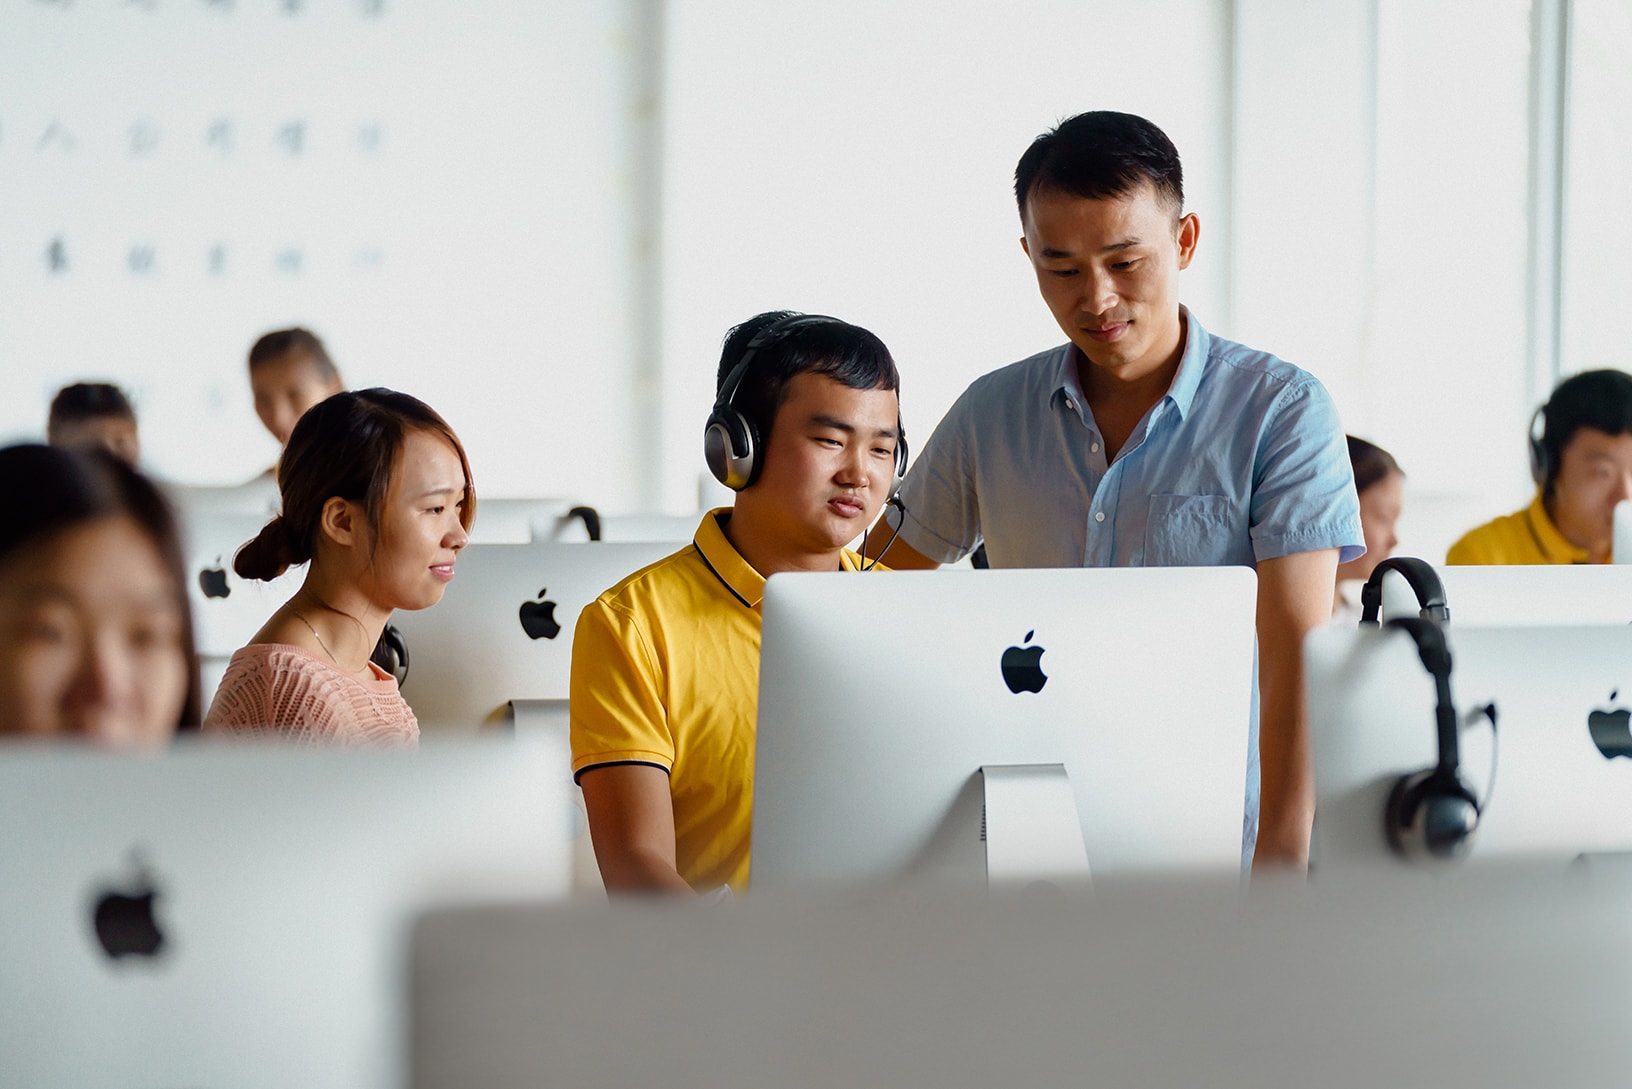 Apple gives supply chain workers access to coding classes.